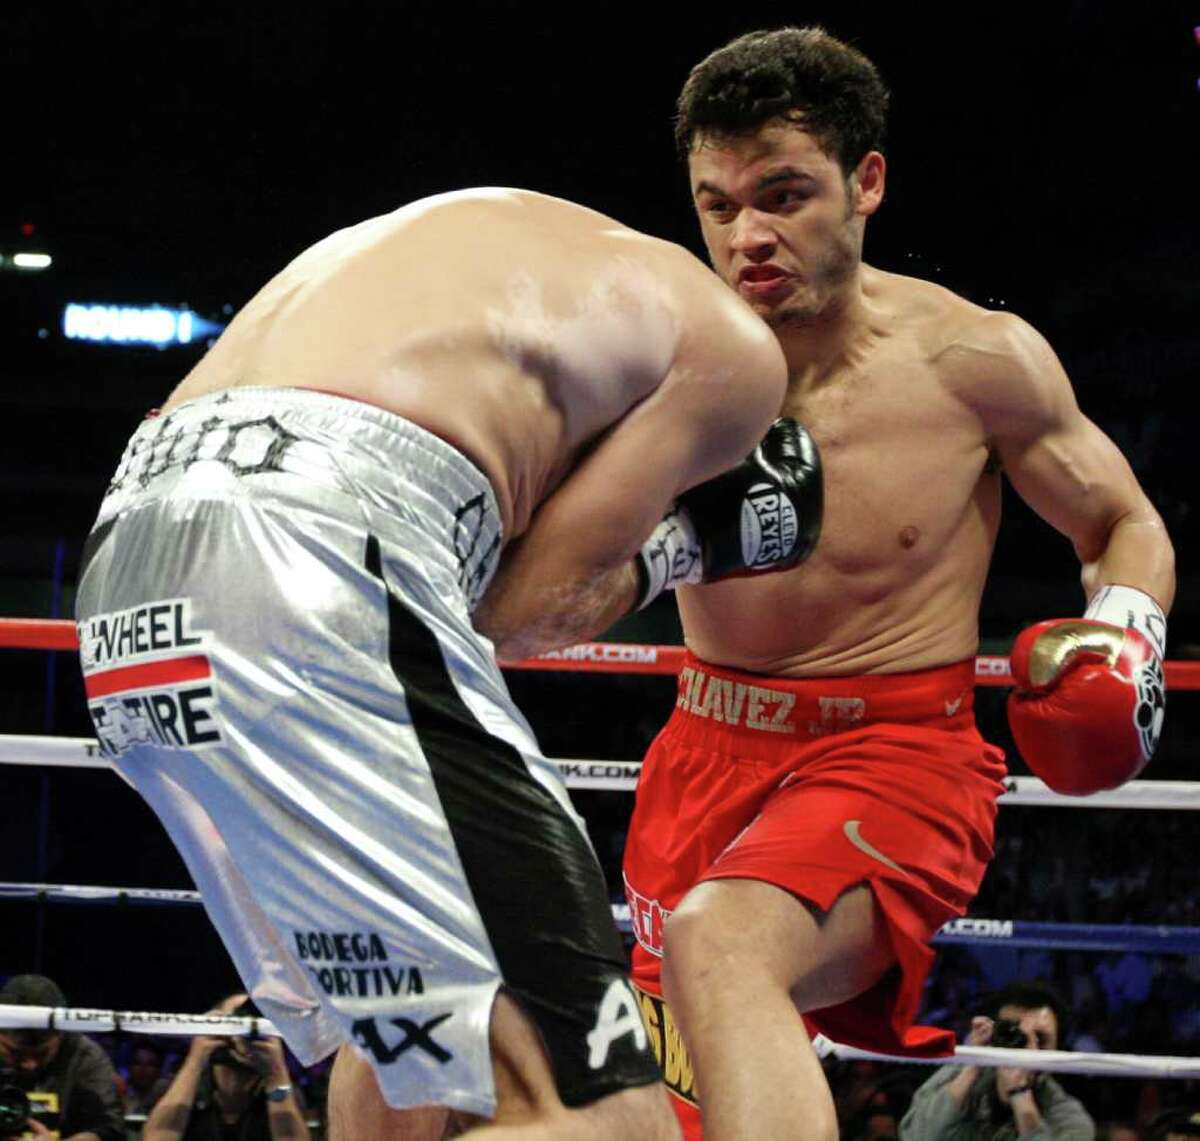 Julio Cesar Chavez, Jr., right, of Mexico, battles it out Saturday Feb. 4, 2012 at the Alamodome in San Antonio Texas against Marco Antonio Rubio, left, of Mexico during their World Middleweight title bout.